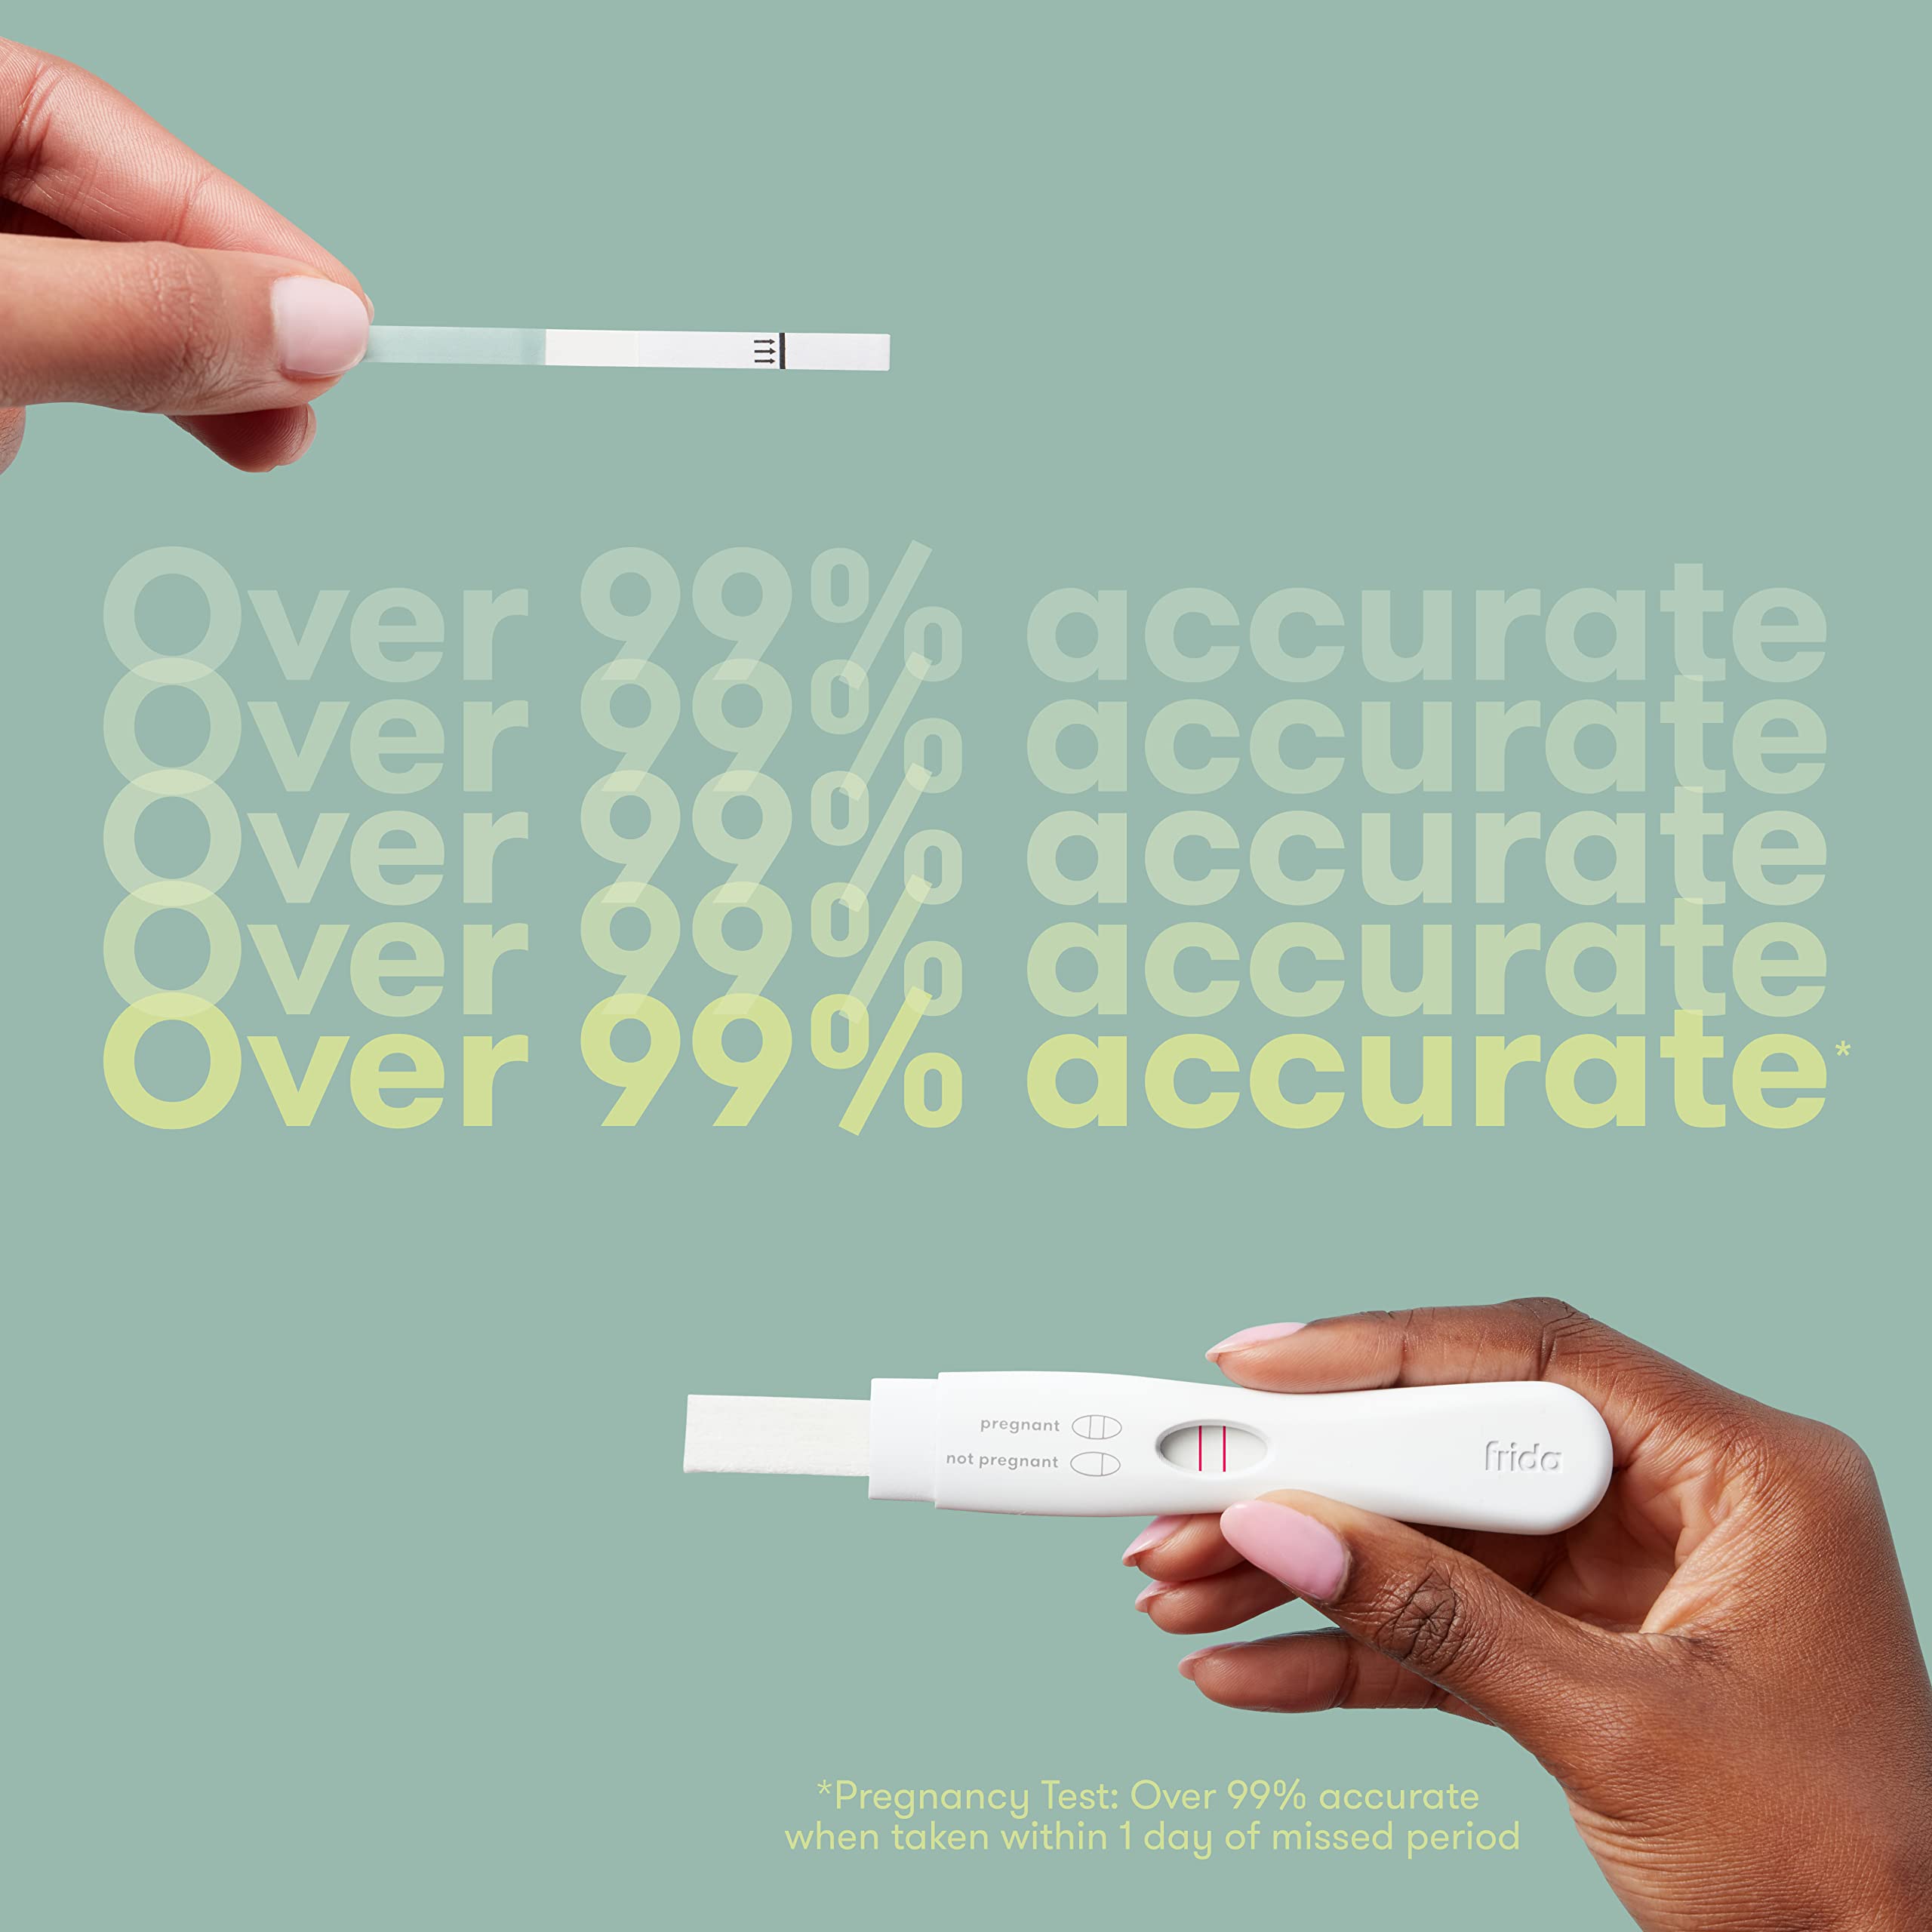 Frida Fertility Ovulation and Pregnancy Test + Track Set - Accurate, Early Detection - Find Your 48 Hour Baby Making Window + Test 6 Days Before Missed Period